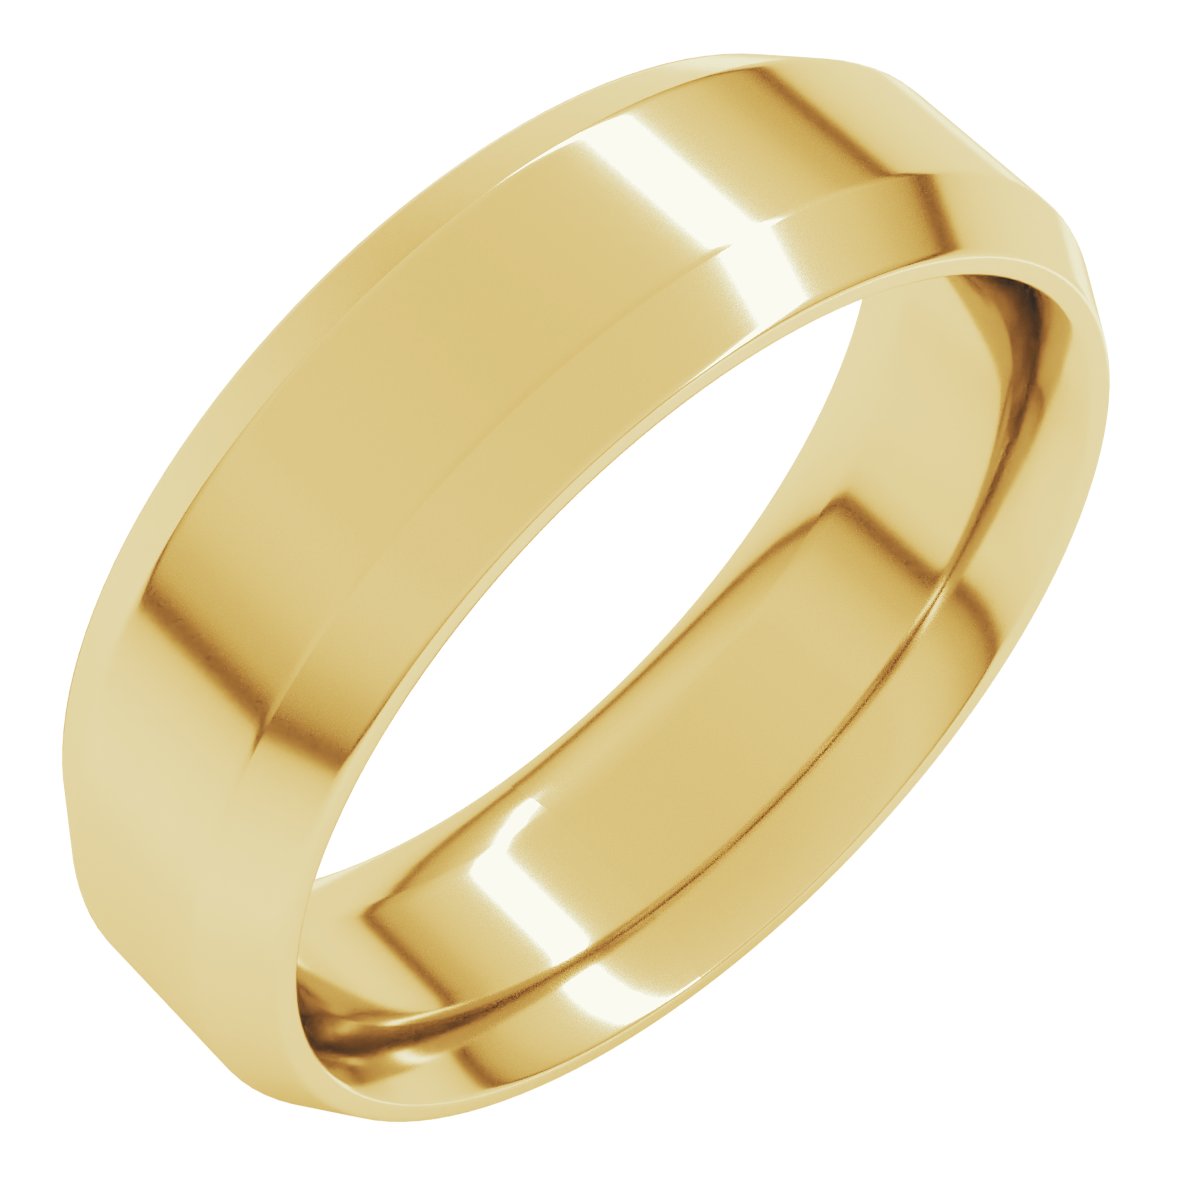 14K Yellow 6 mm Beveled-Edge Comfort-Fit Band Size 8